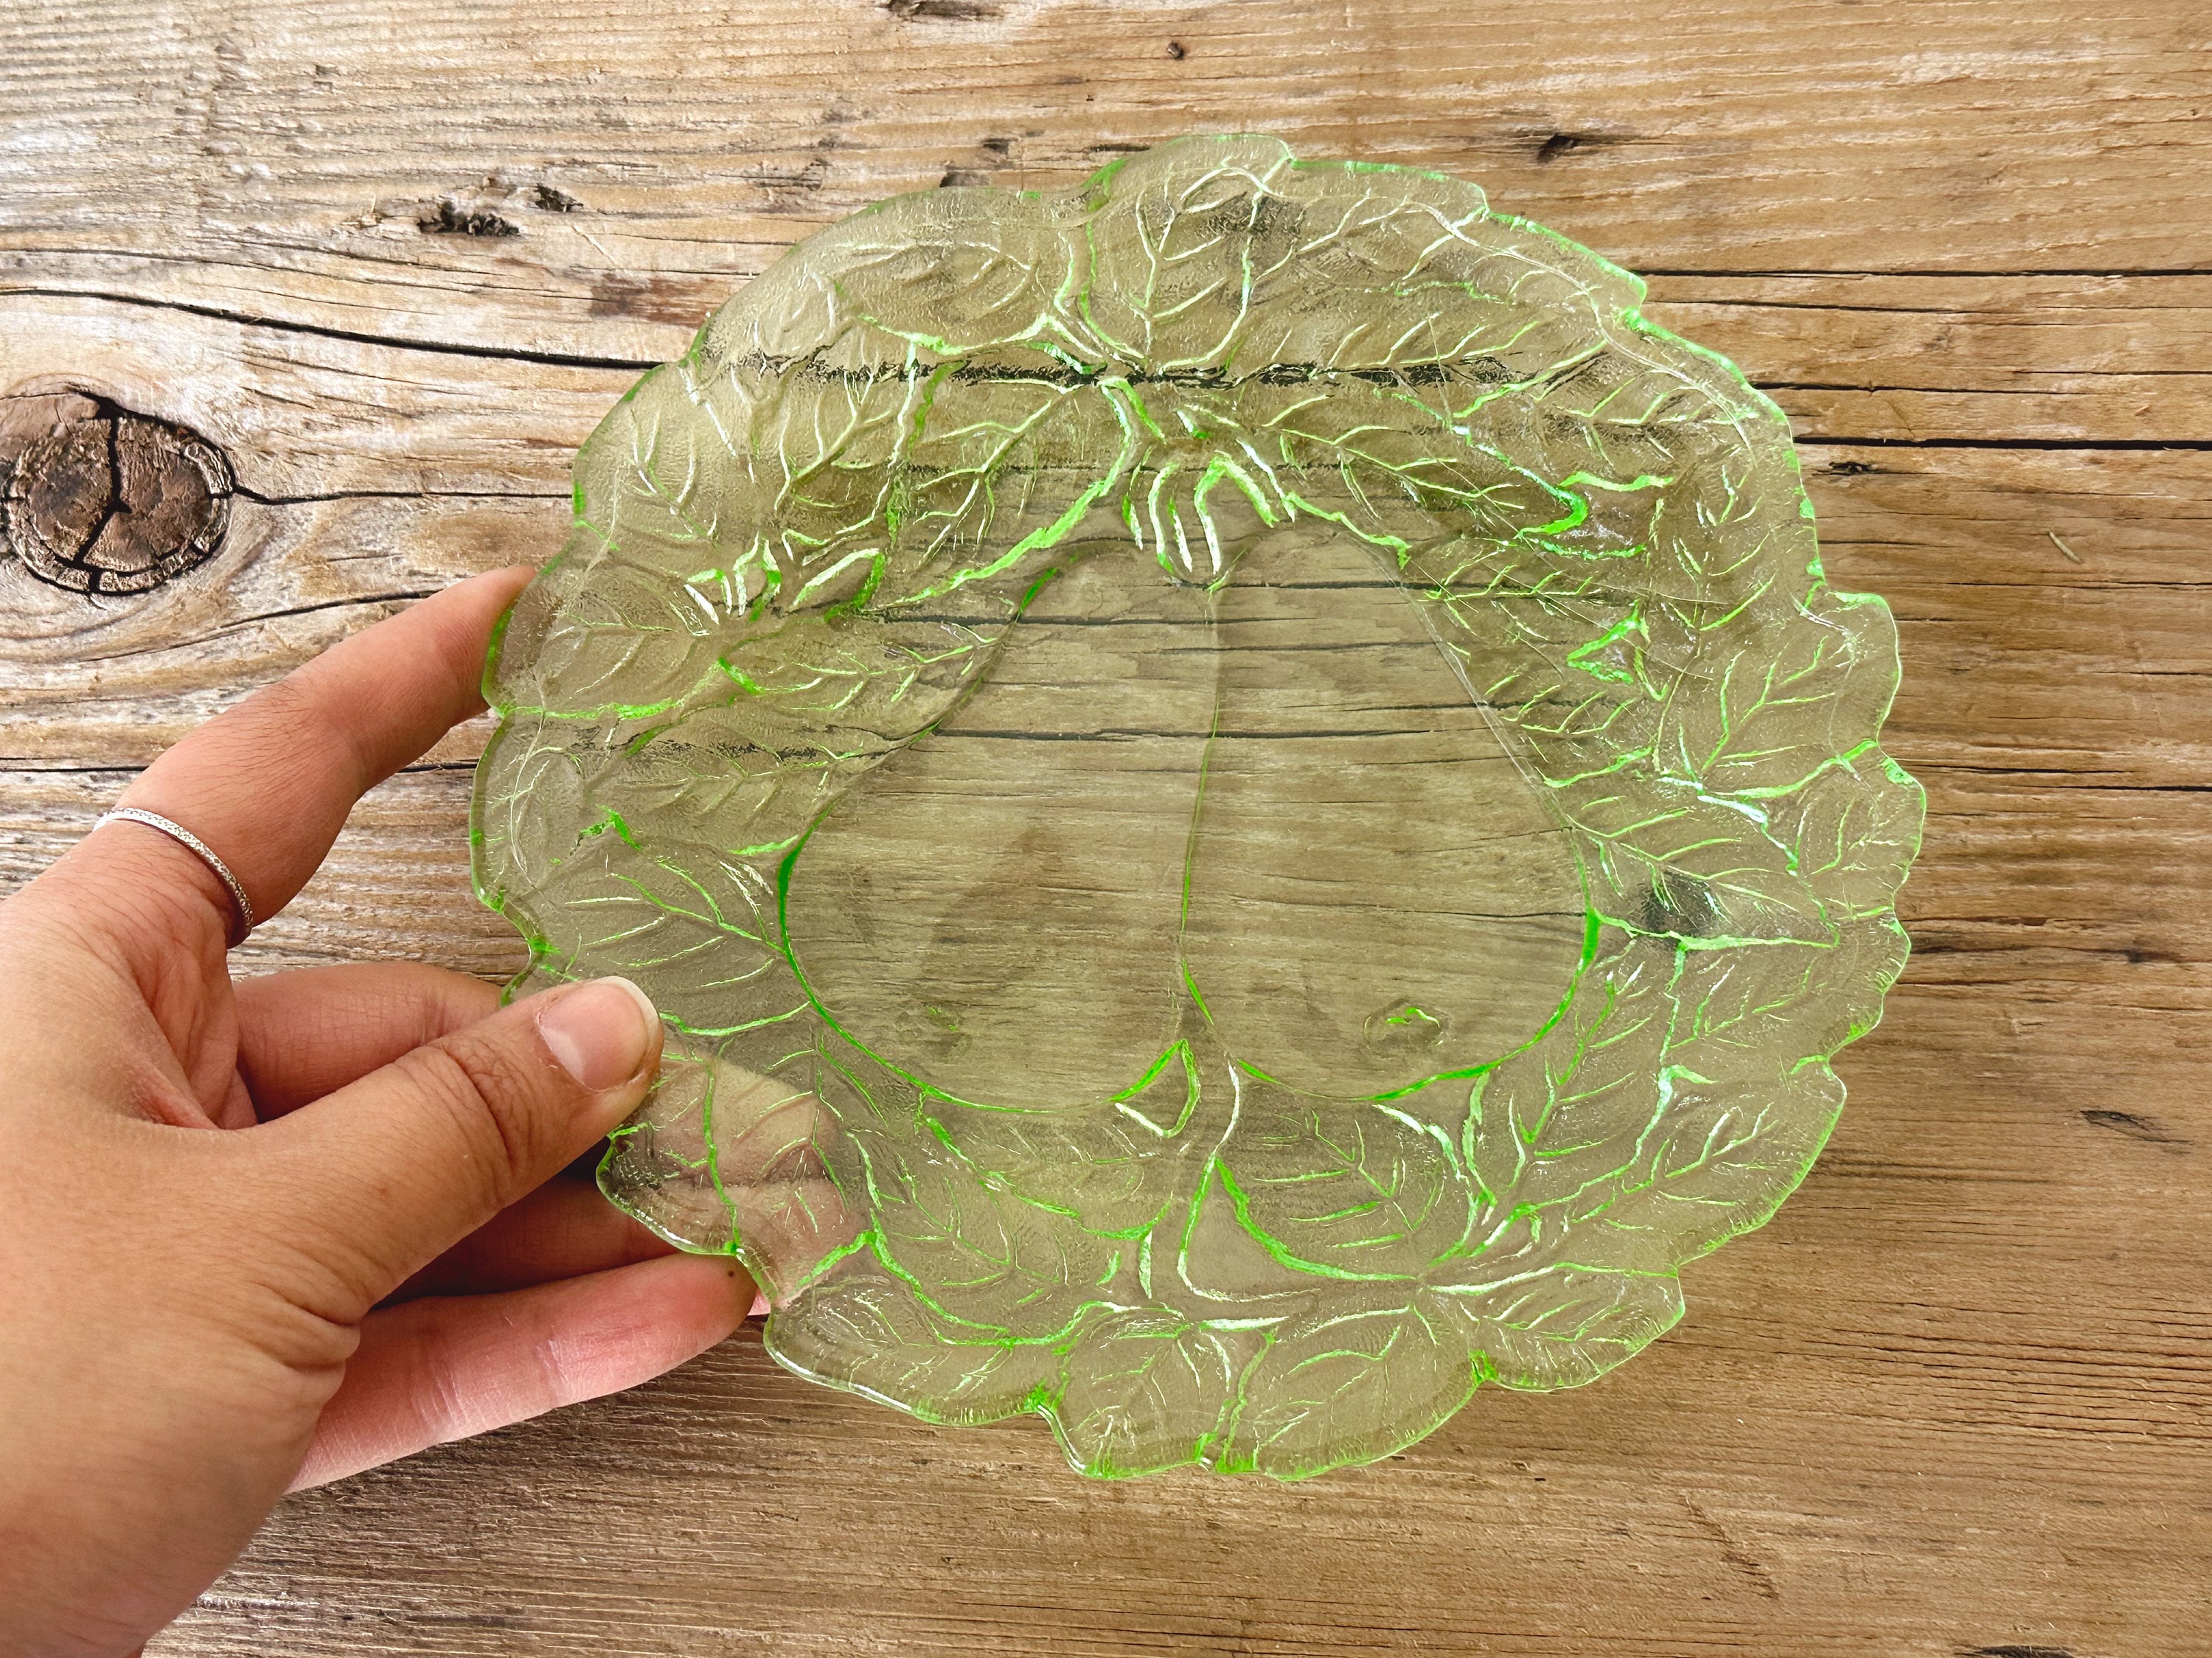 Vintage 1930s Green Uranium Depression Glass Small Plates | Indiana Glass Sweet Pear Pattern Plate | Cabbage Leaf Candy Dish